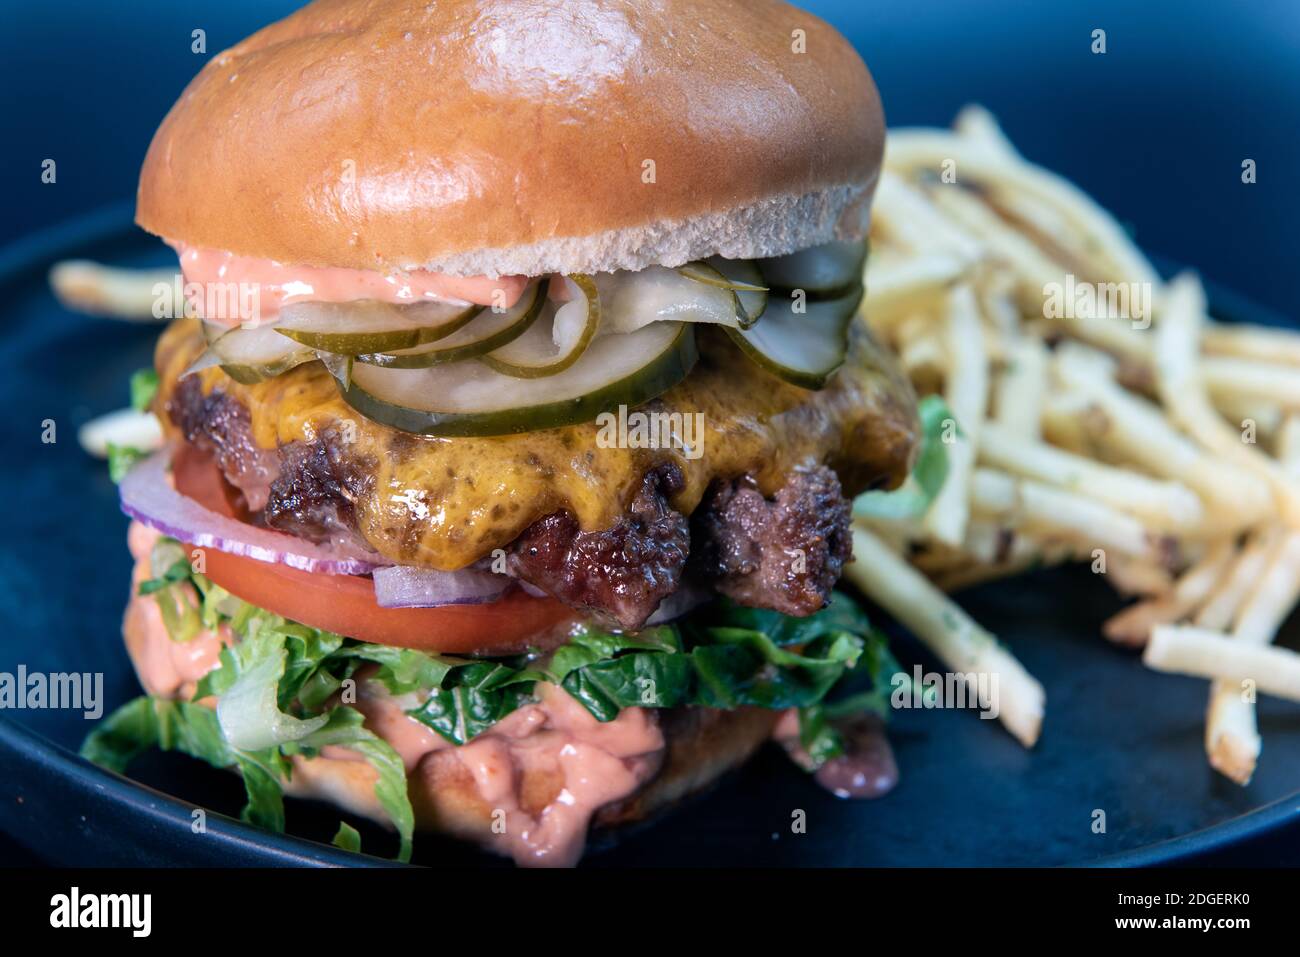 Tall order of cheeseburger and french fries loaded with all the toppings that the hamburger buns can hold Stock Photo